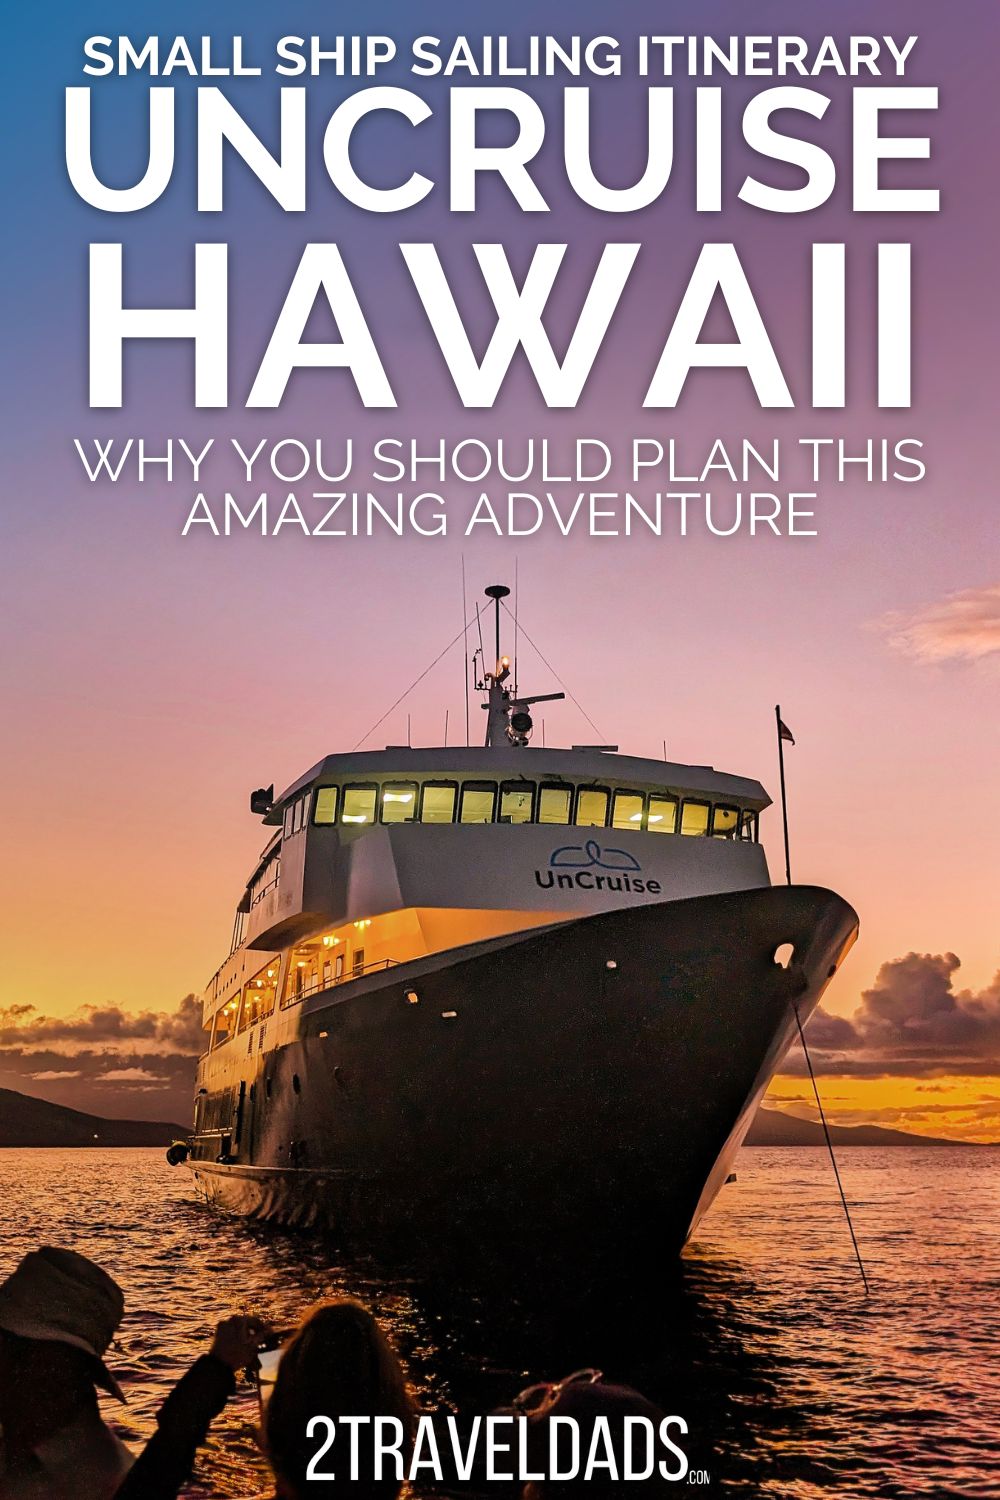 UnCruise Hawaii is a very different way to explore the islands. See why small ship sailing on a Hawaii UnCruise is the best way to see multiple islands from a unique perspective, visiting with Hawaiian communities and low impact travel in mind.